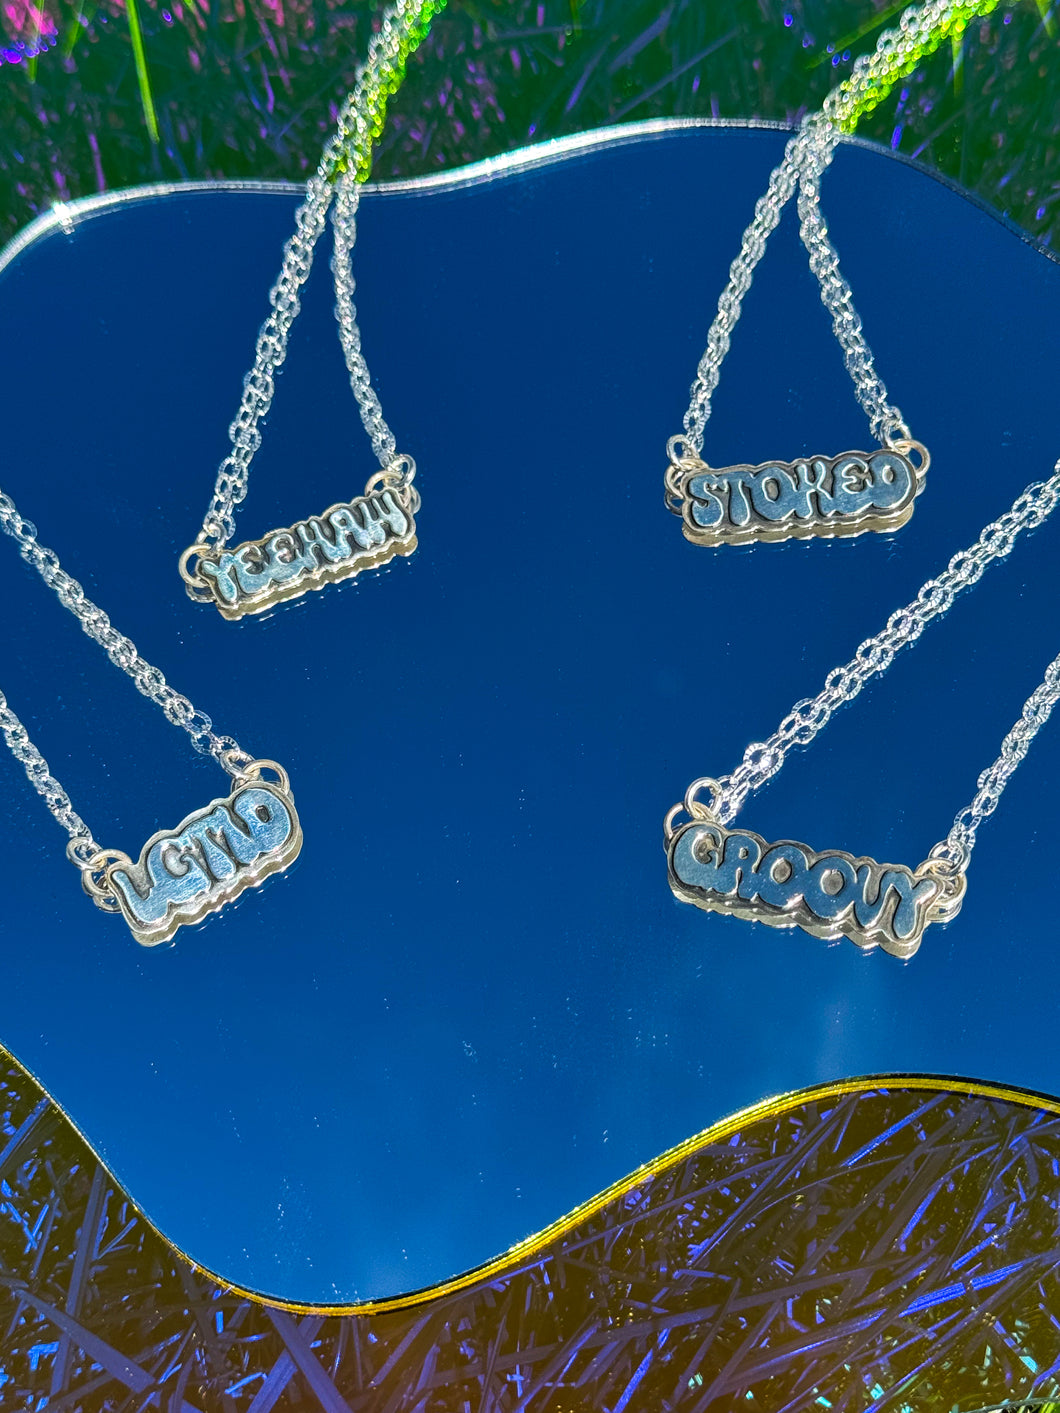 Groovy Font Necklaces